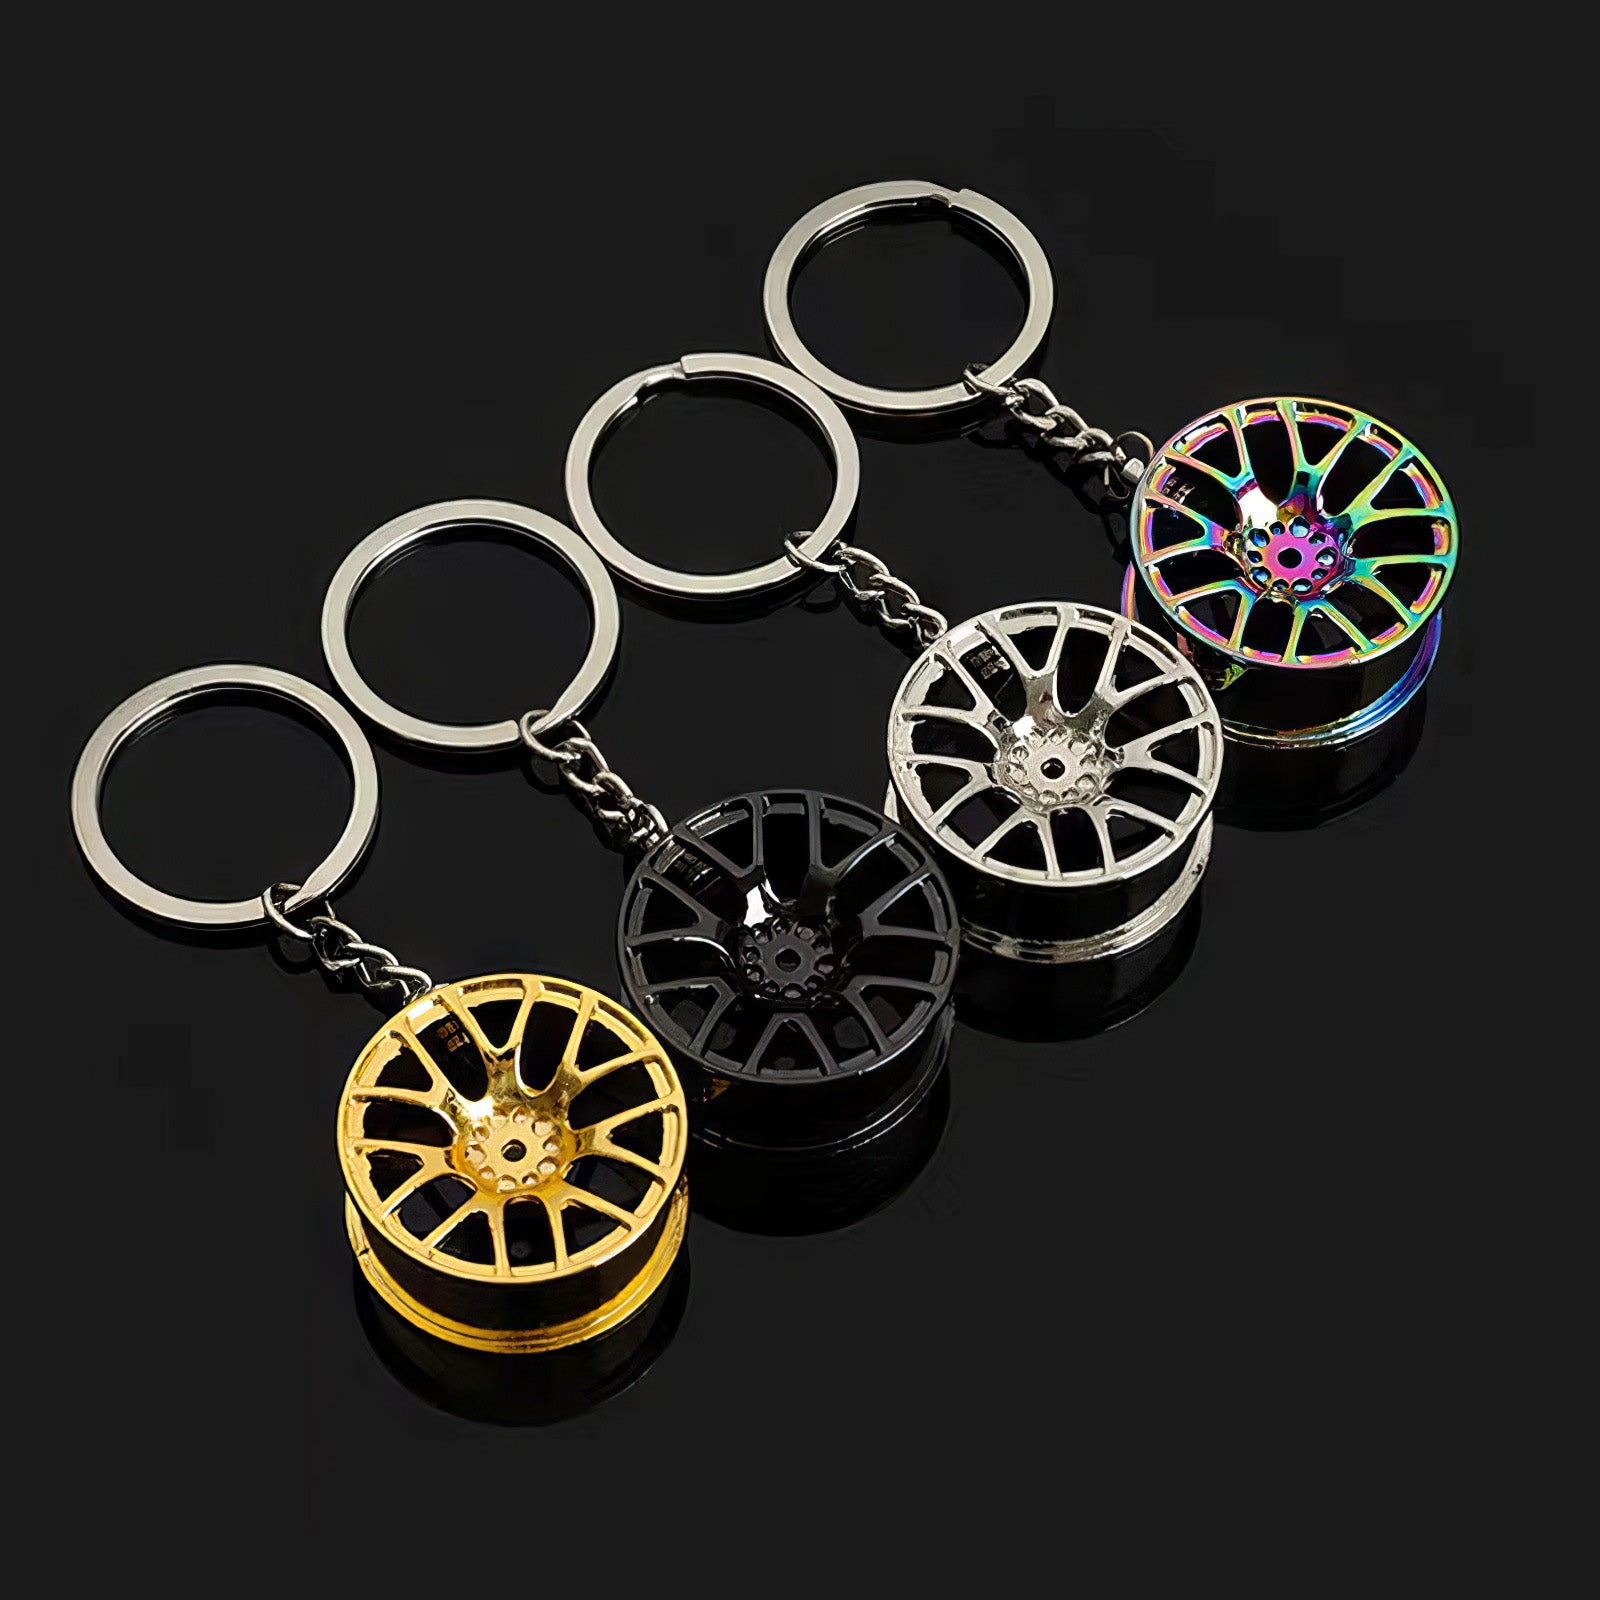 Concave wheel keychain in neochrome, black, silver, and gold variants.